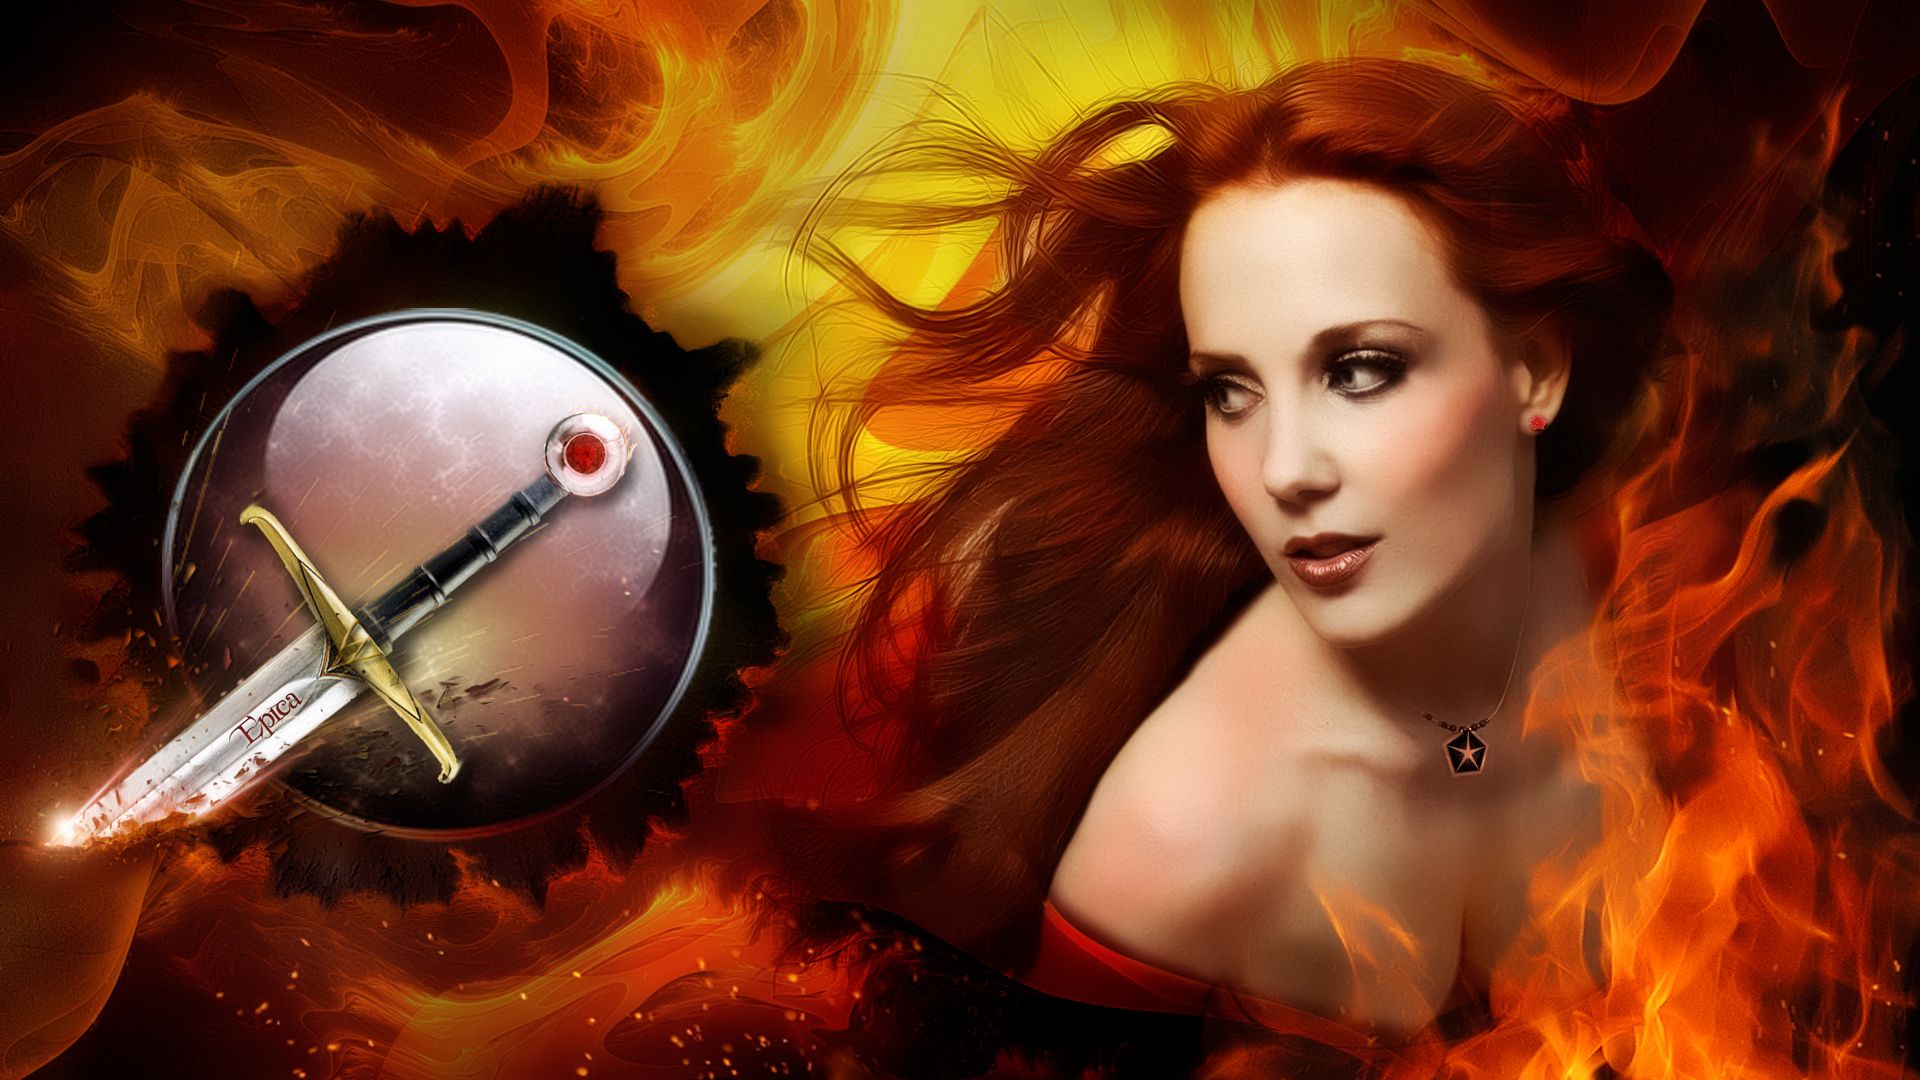  Epica HQ Background Images